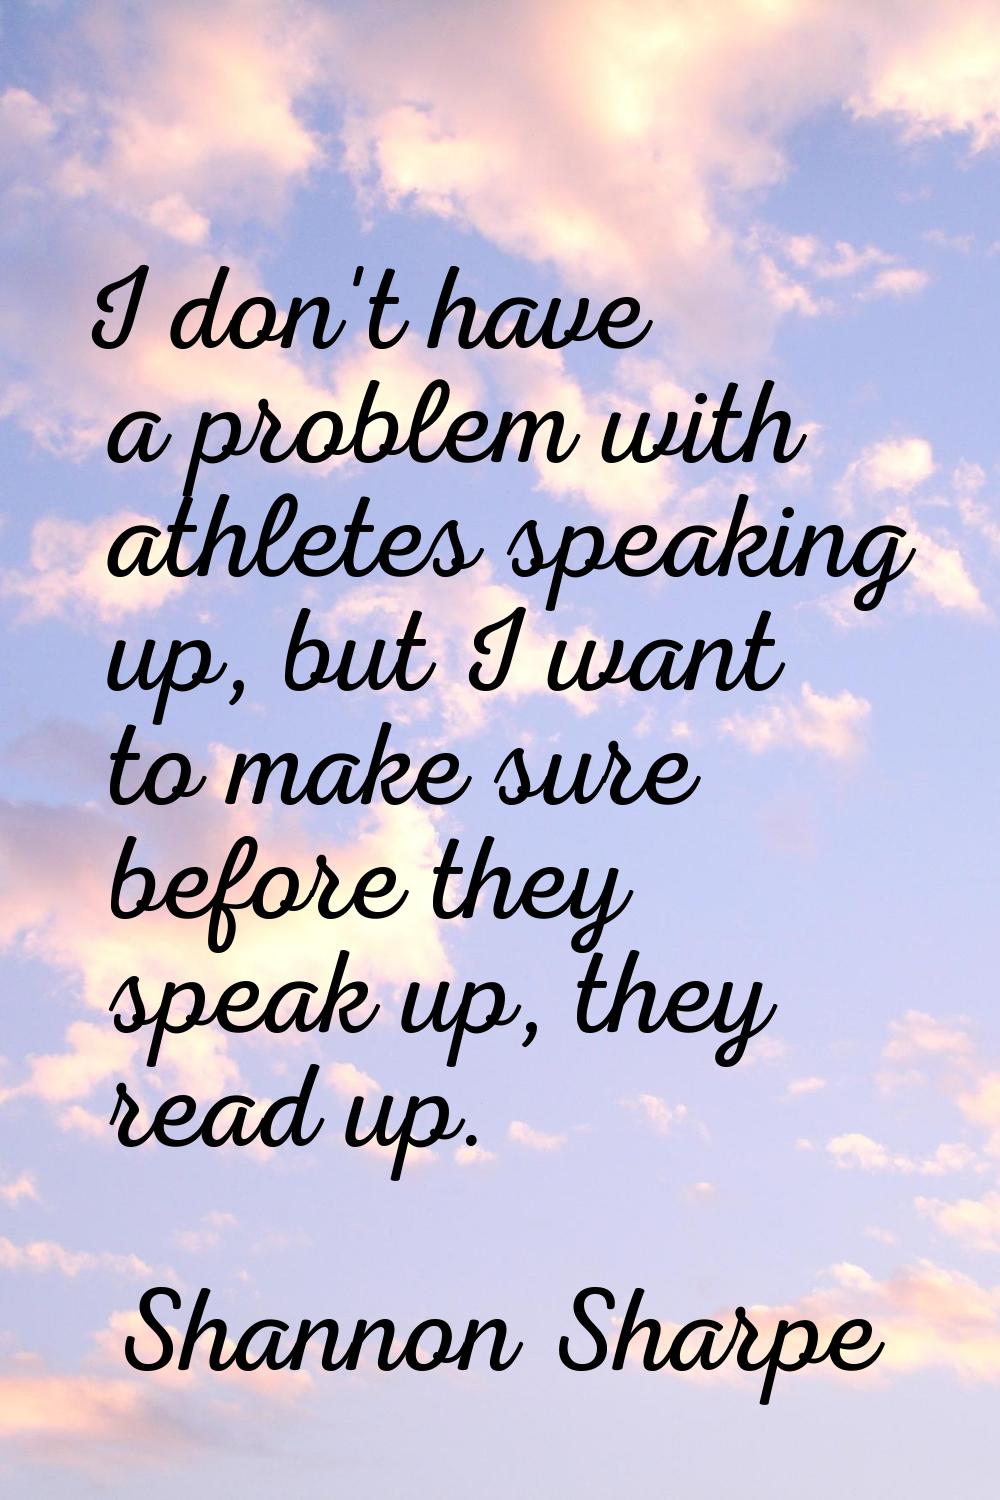 I don't have a problem with athletes speaking up, but I want to make sure before they speak up, the